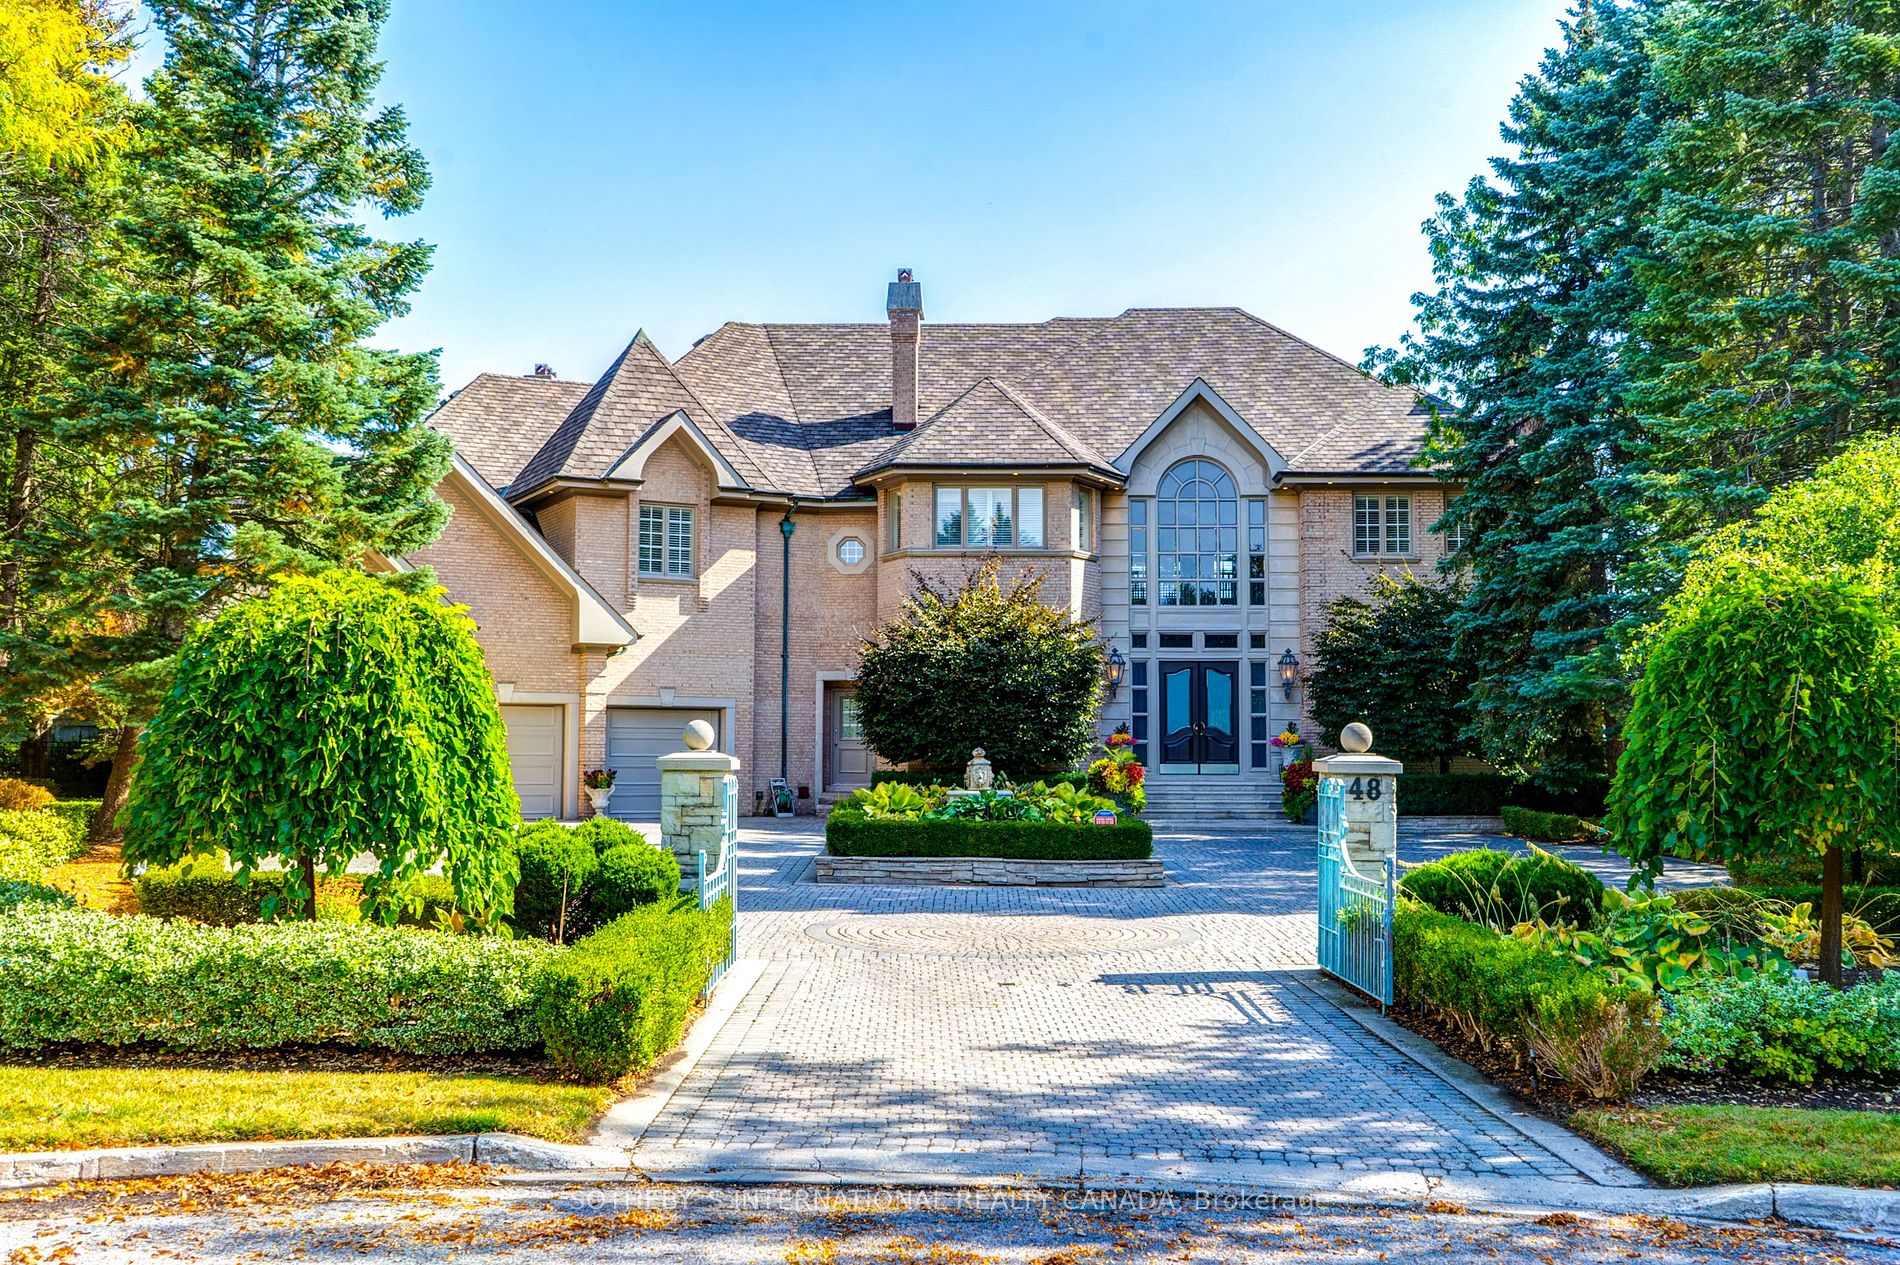 Detached house for sale at 48 Old Park Lane Richmond Hill Ontario